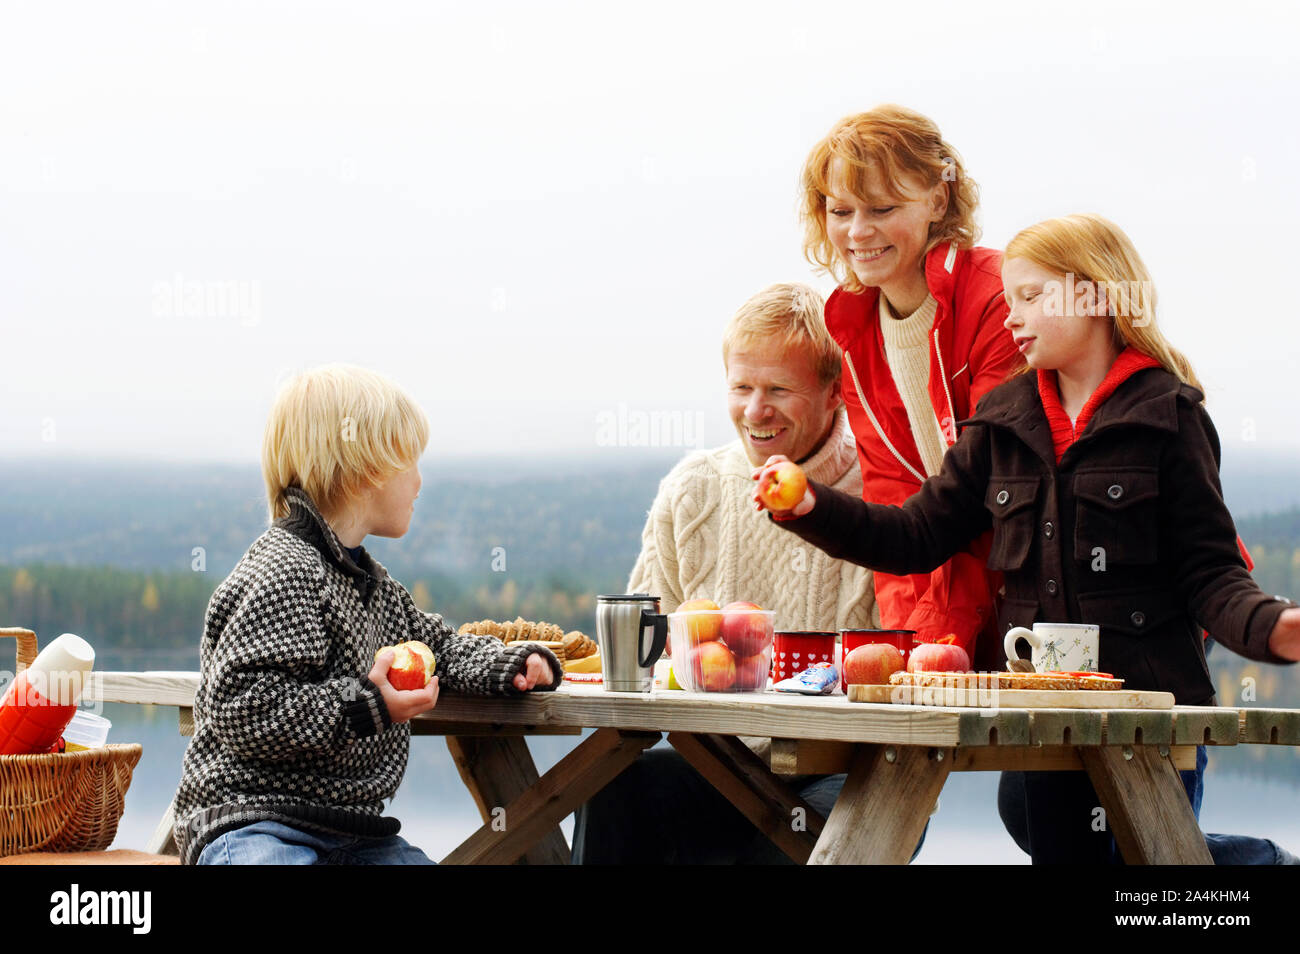 Family having outdoor meal Stock Photo